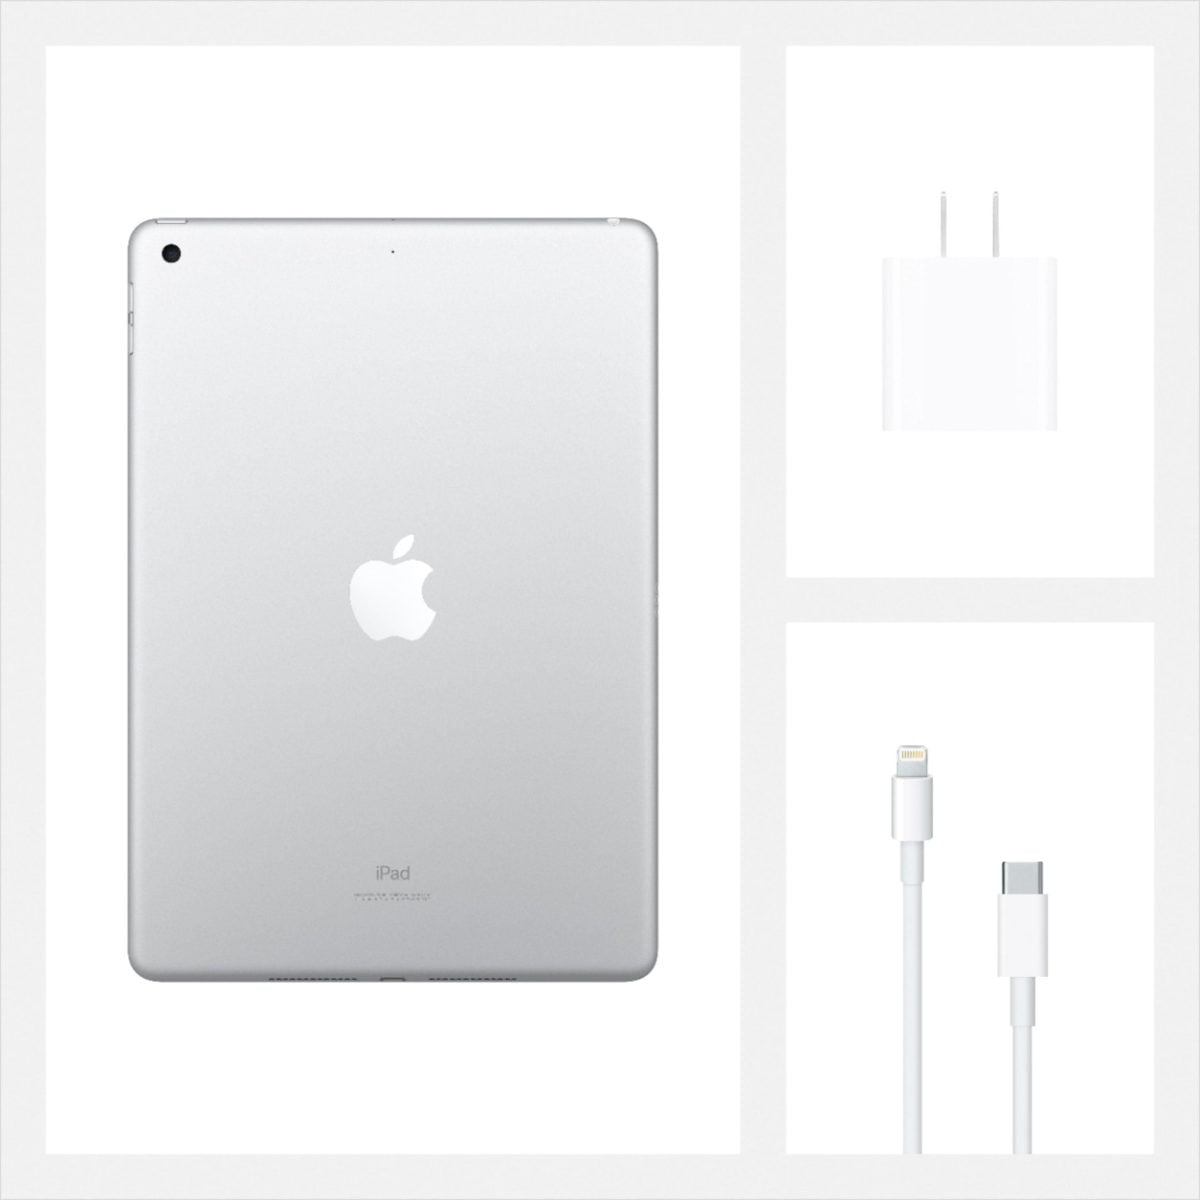 5199800Cv16D Scaled Apple &Lt;H1&Gt;Apple - 10.2-Inch Ipad - Latest Model - (8Th Generation) With Wi-Fi - 32Gb - Silver&Lt;/H1&Gt; &Lt;Div Class=&Quot;Product-Description&Quot;&Gt;The New Ipad. It'S Your Digital Notebook, Mobile Office, Photo Studio, Game Console, And Personal Cinema. With The A12 Bionic Chip That Can Easily Power Essential Apps And Immersive Games. So You Can Edit A Document While Researching On The Web And Making A Facetime Call To A Colleague At The Same Time. Apple Pencil Makes Note-Taking With Ipad A Breeze.¹ Attach A Full-Size Smart Keyboard For Comfortable Typing.¹ And Go Further With Wi-Fi And Gigabit-Class Lte² And All-Day Battery Life.³&Lt;/Div&Gt; Apple - 10.2-Inch Ipad - Latest Model - (8Th Generation) With Wi-Fi - 32Gb - Silver